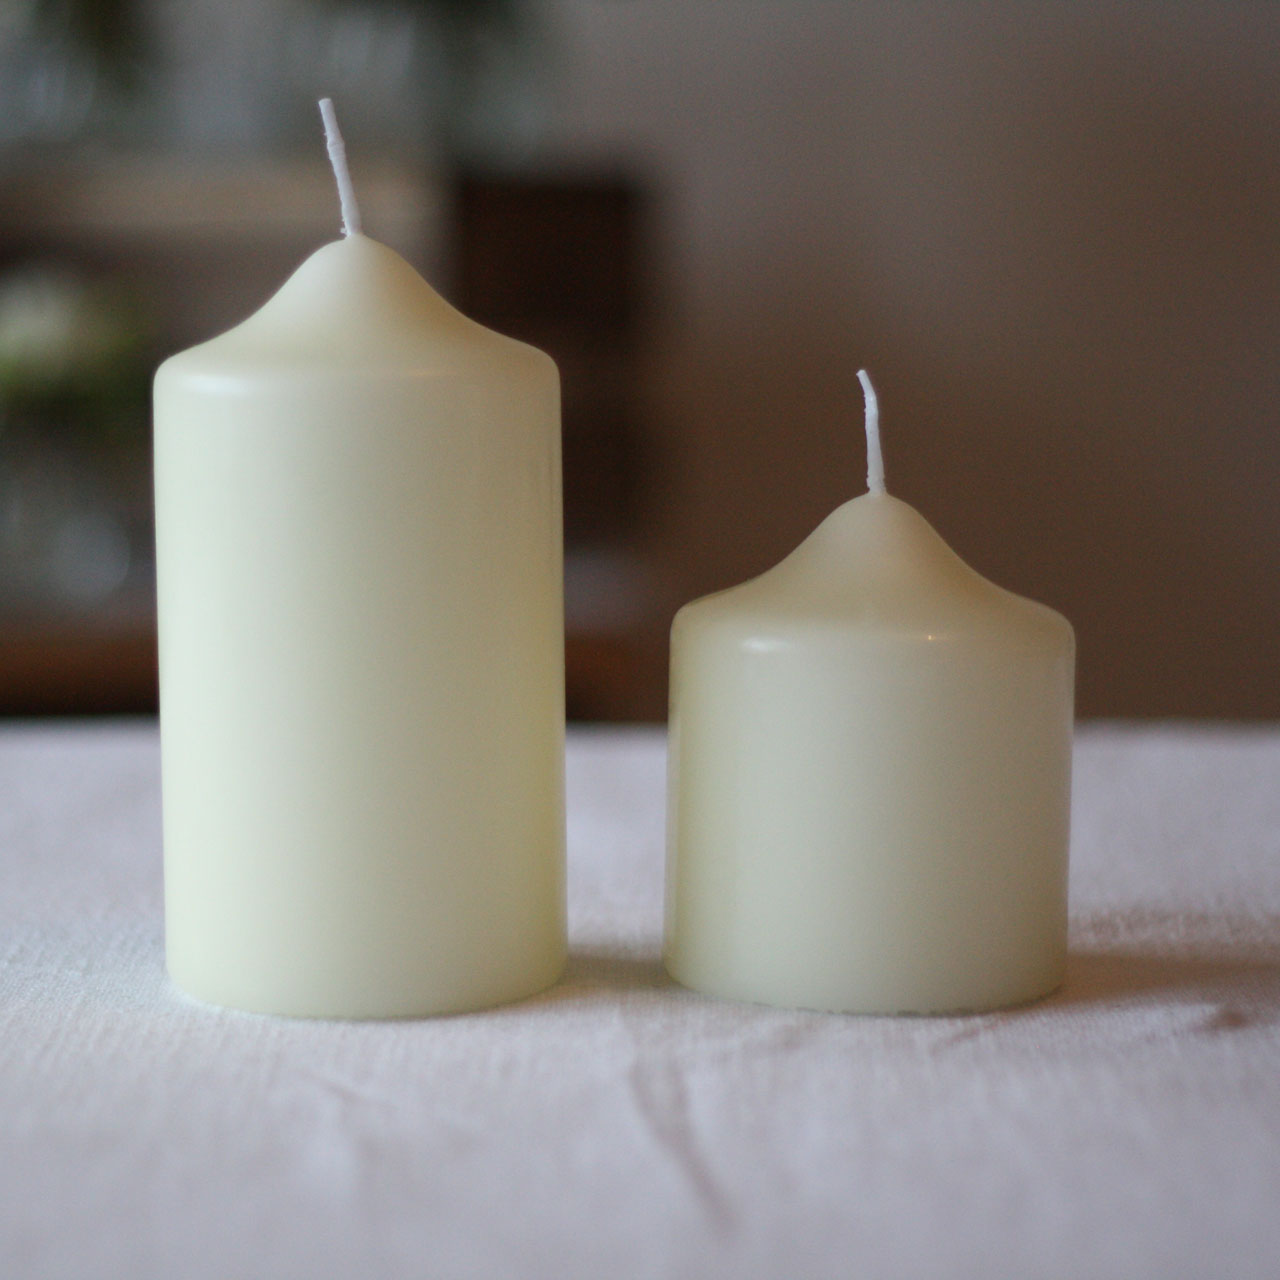 church candles available to buy online from @theweddingomd